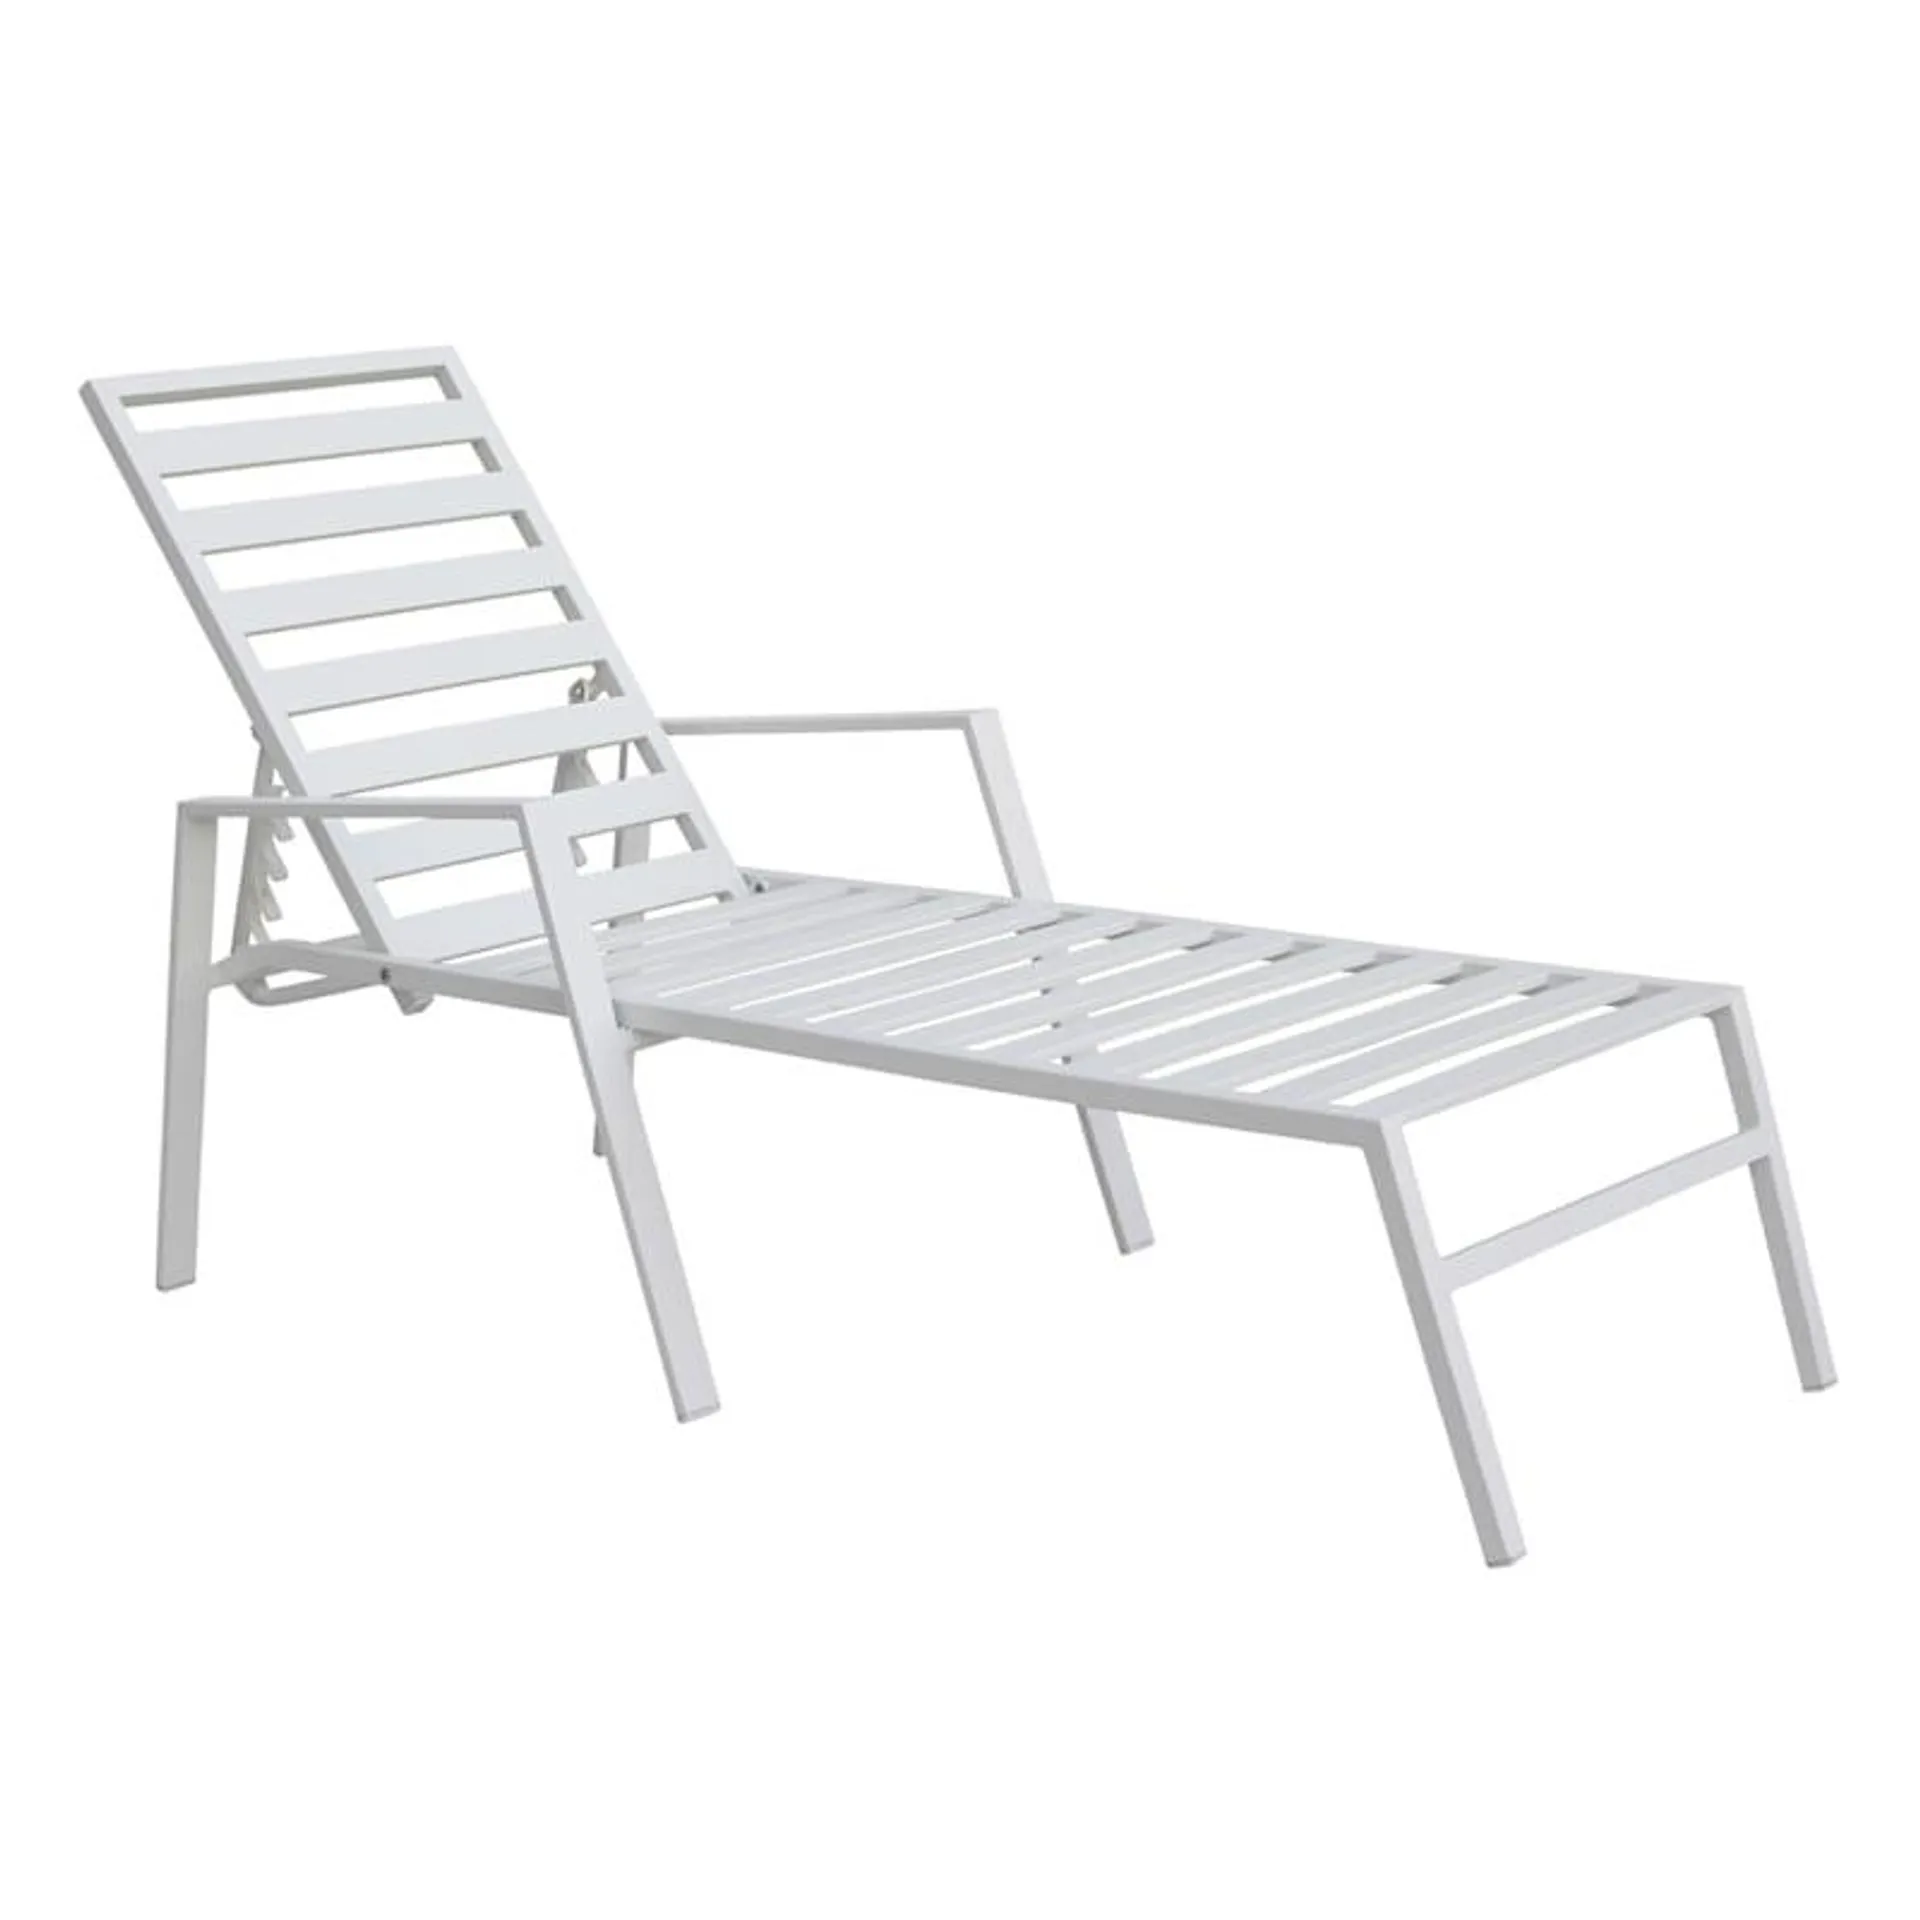 Grammercy White Patio Chaise Lounge Chair